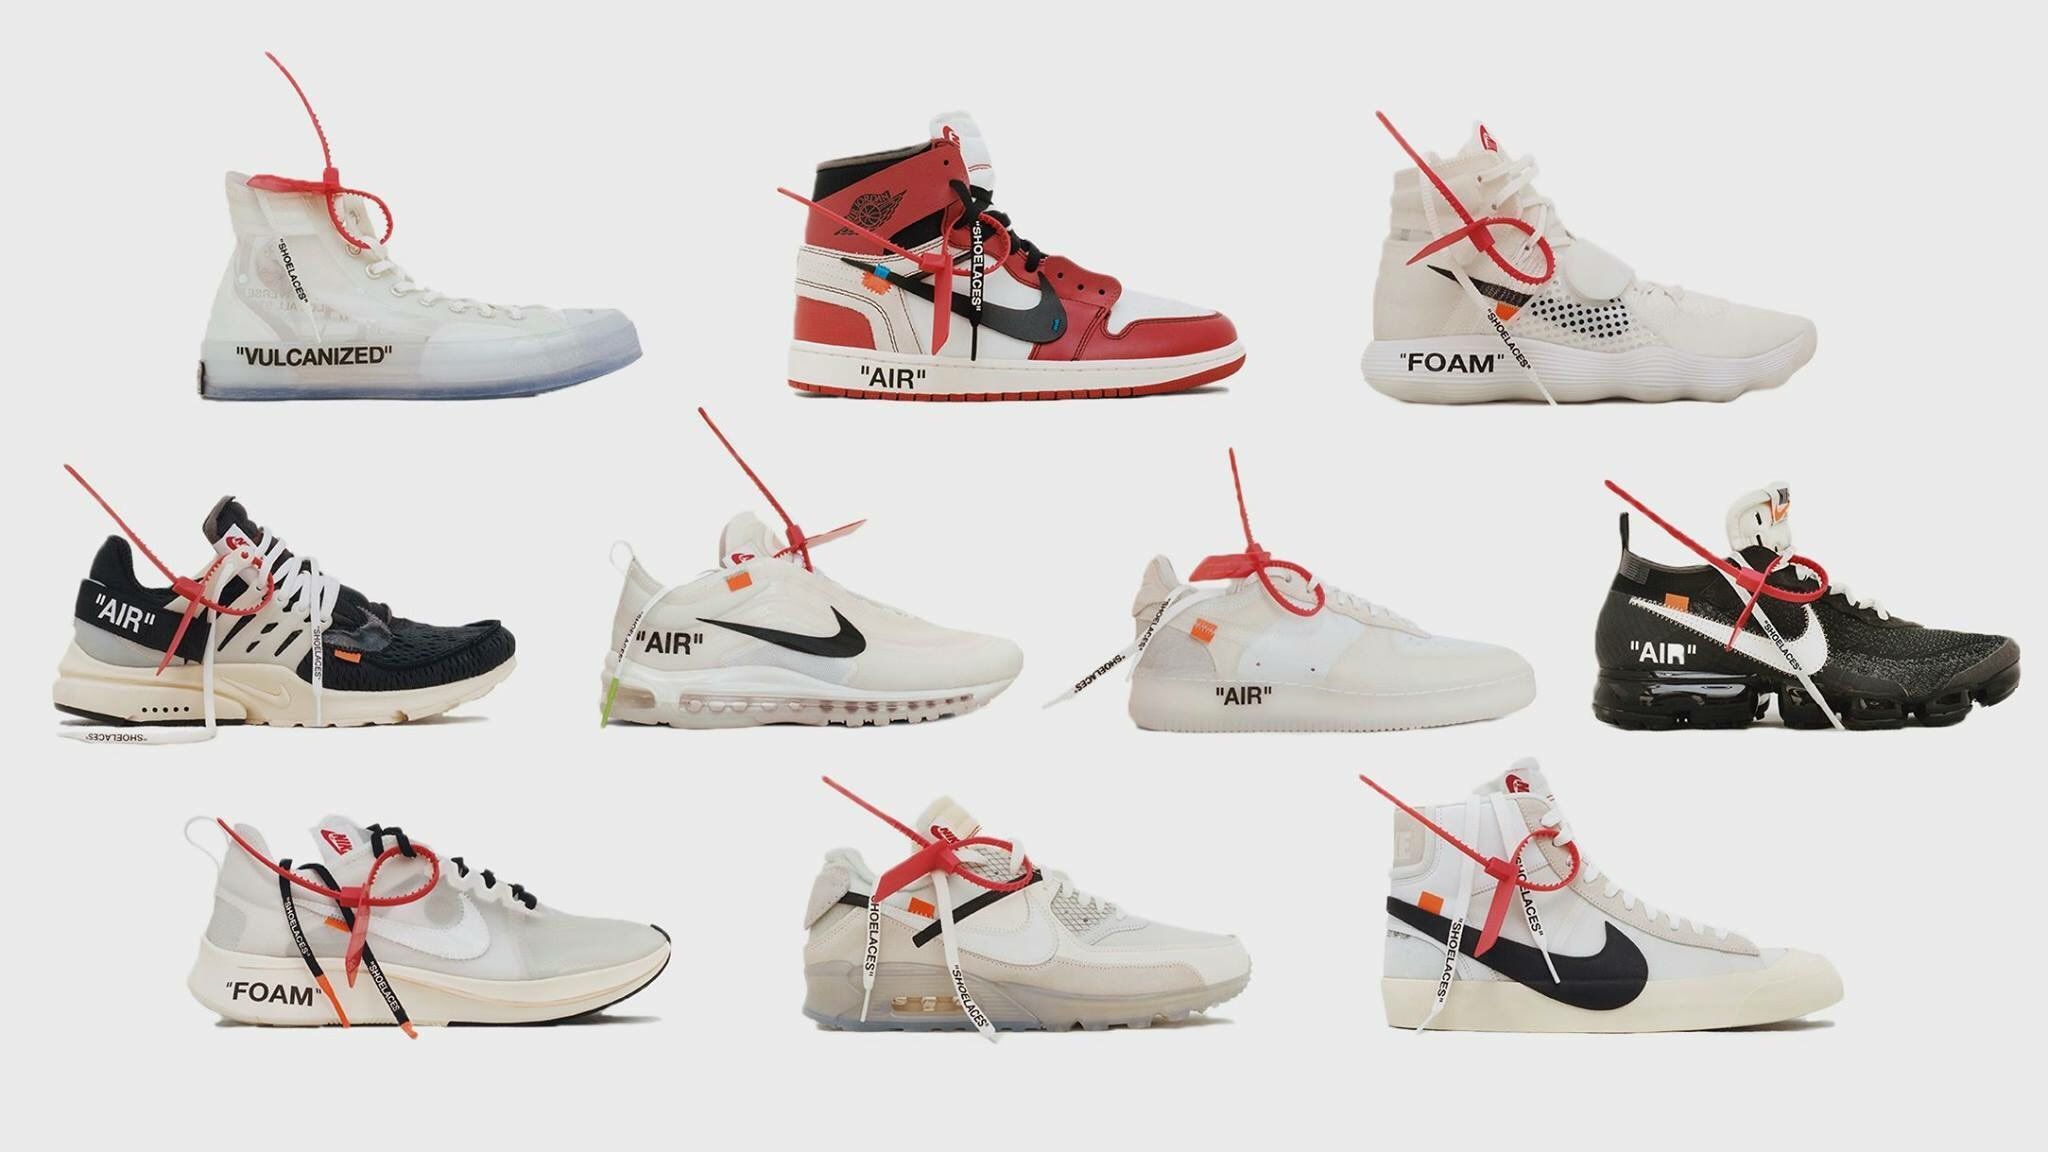 OffWhite x Nike The History Behind Virgil Ablohs Sneaker Collaborations   Sneakers Sports Memorabilia  Modern Collectibles  Sothebys